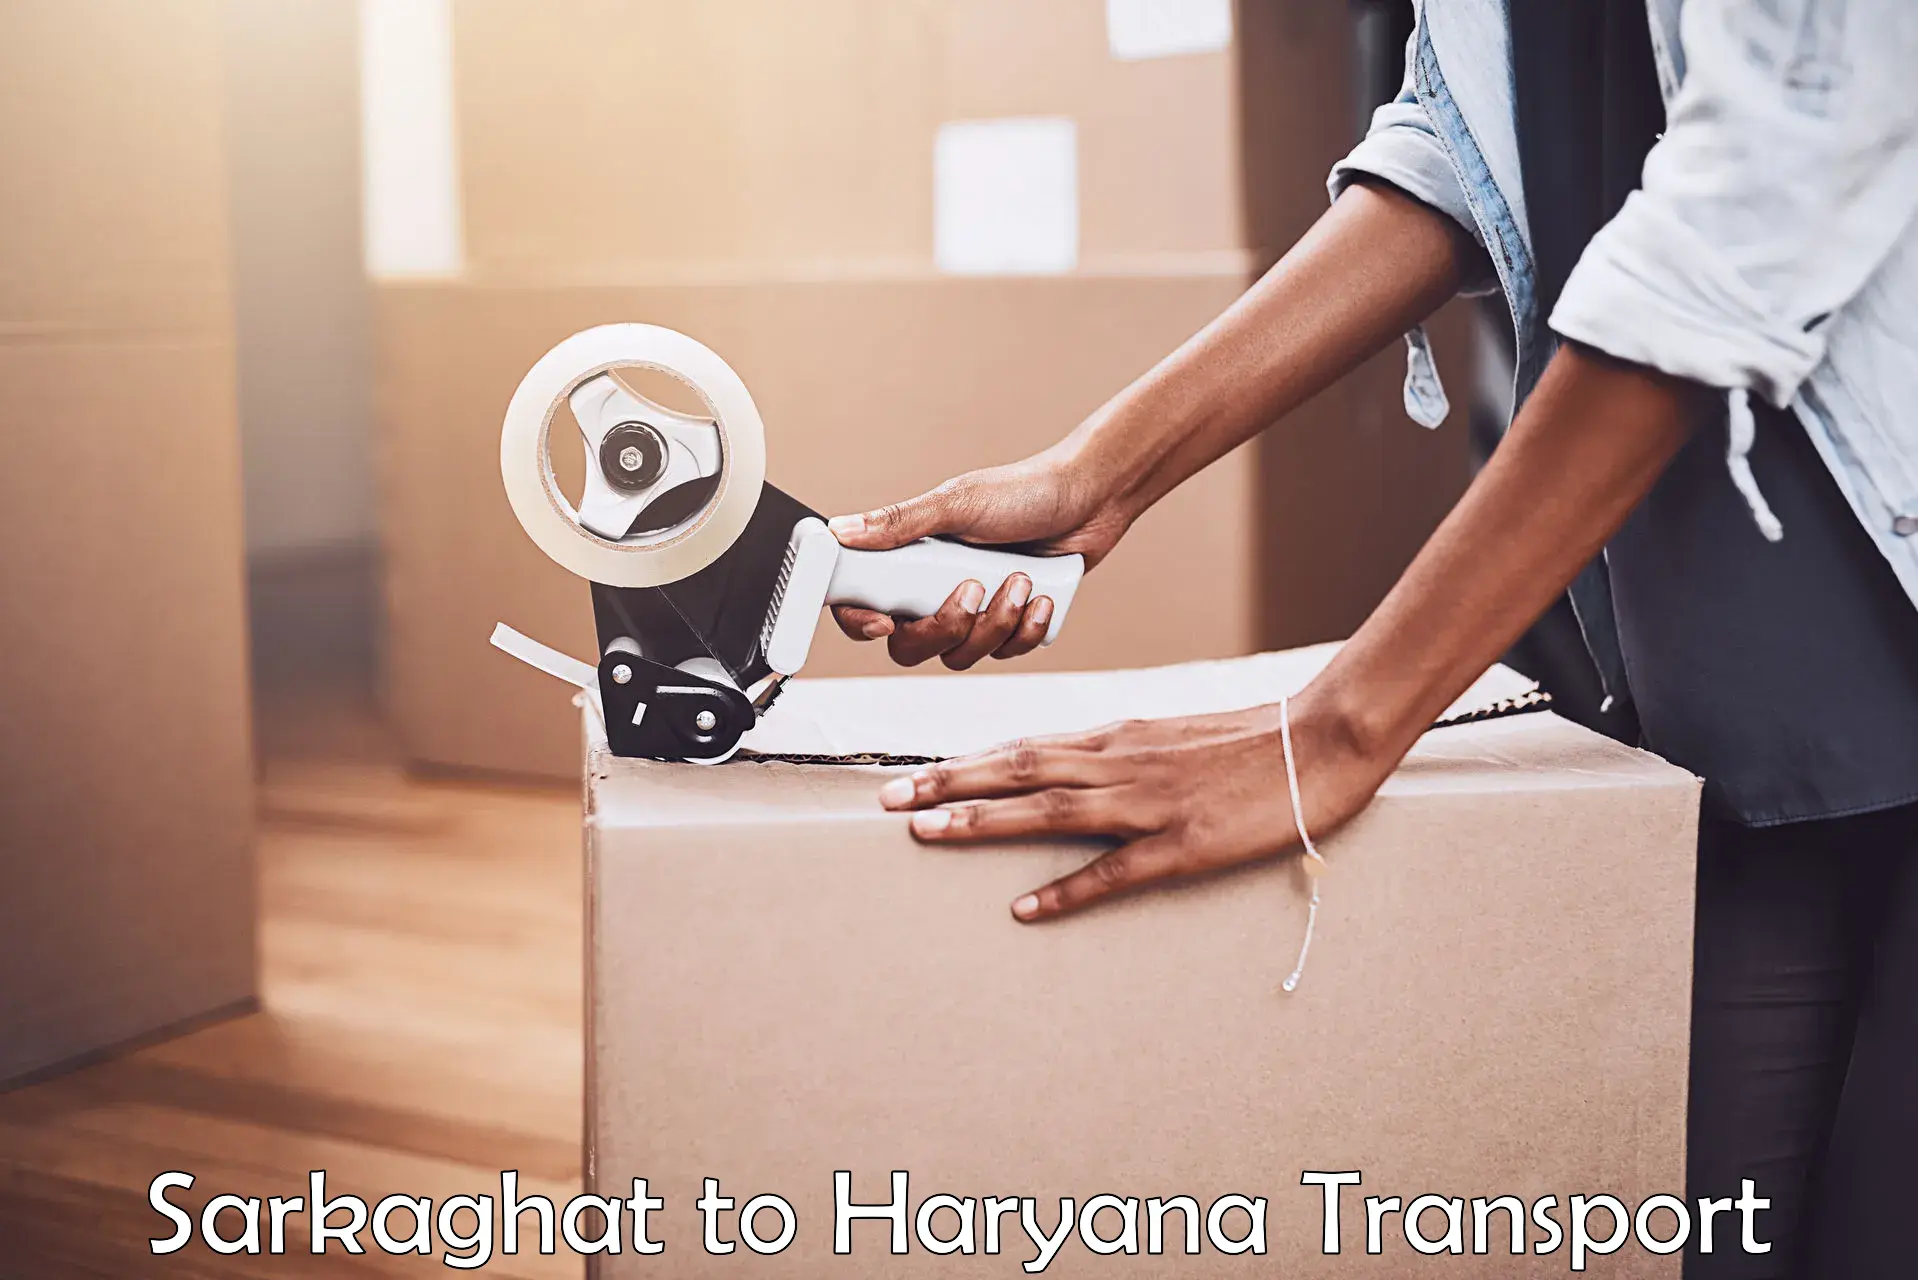 Truck transport companies in India Sarkaghat to Bhiwani